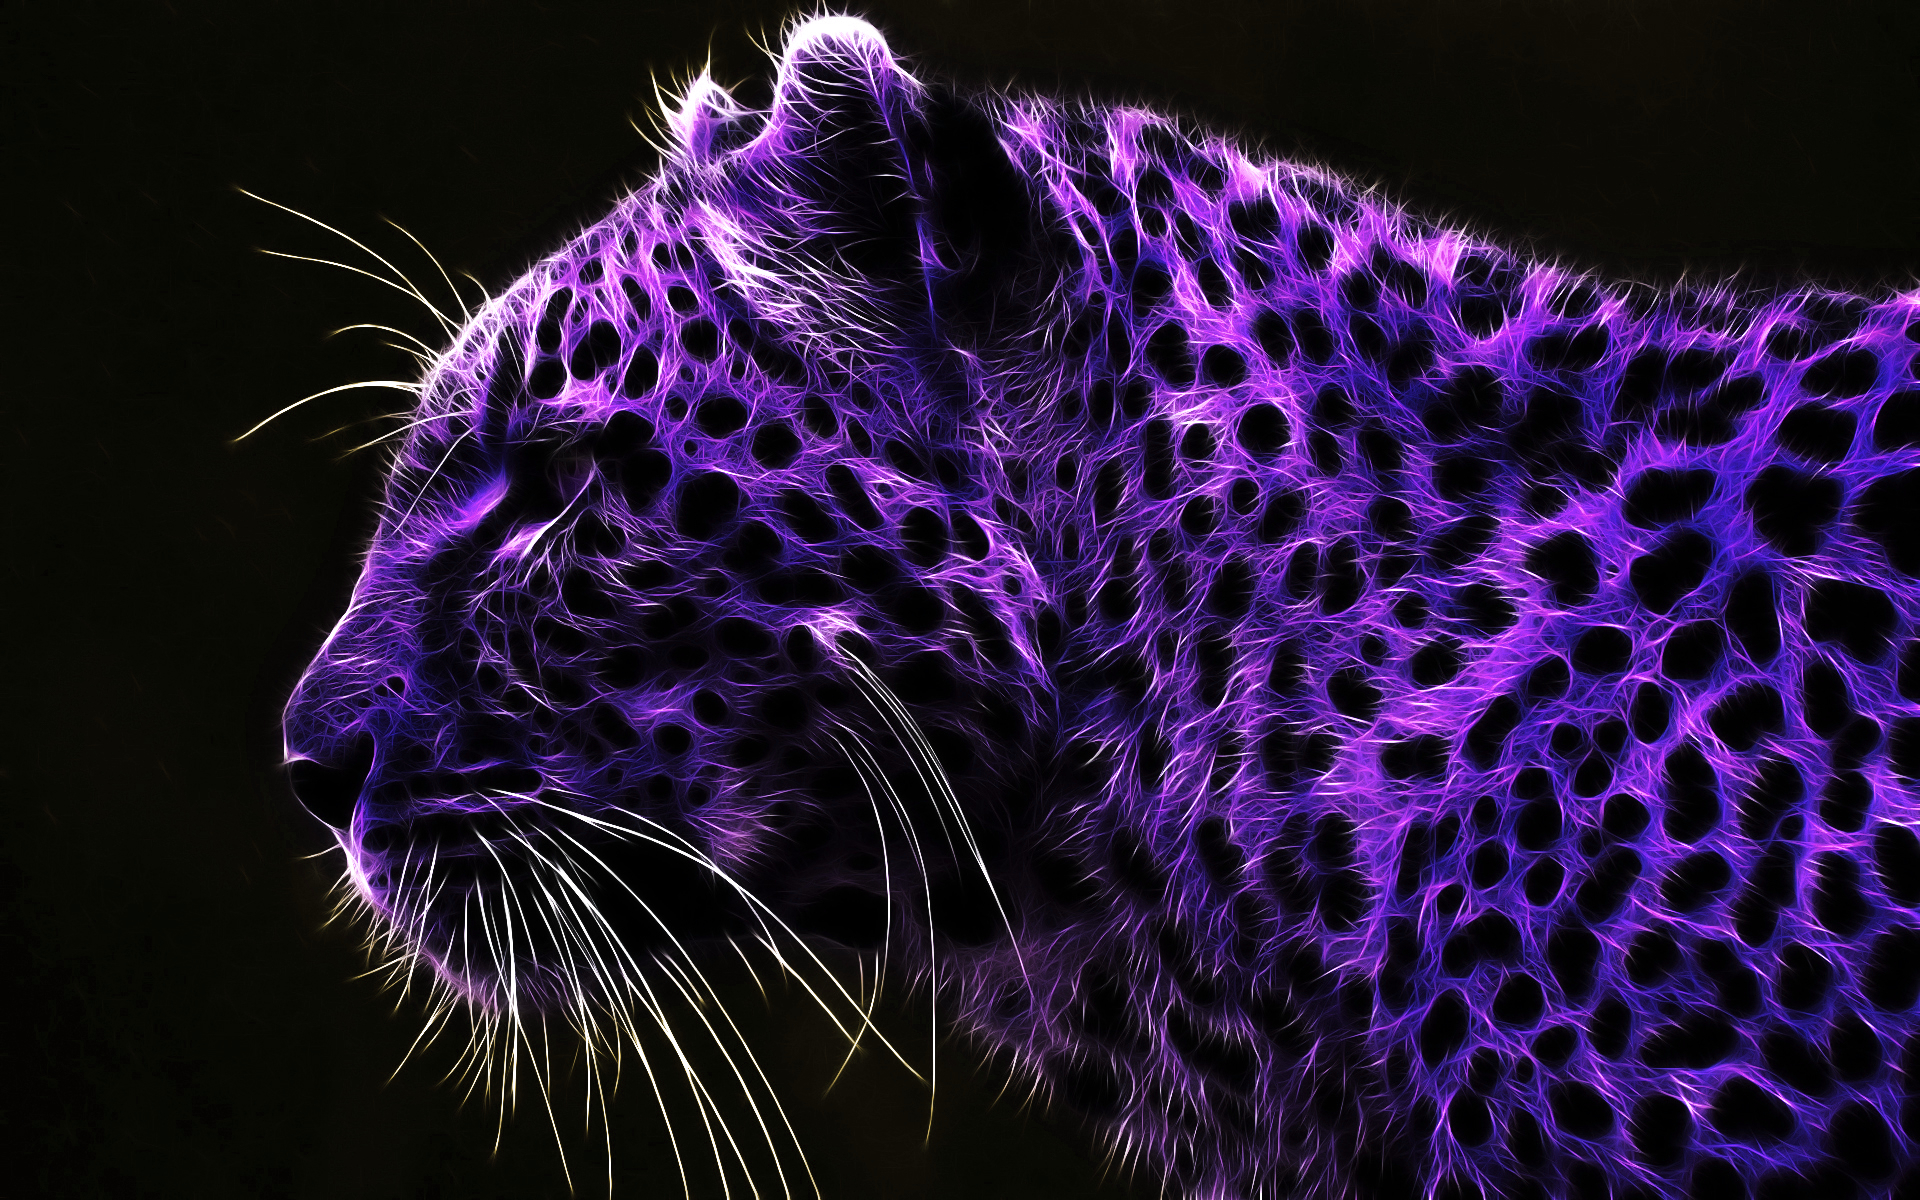 Leopard resting on a purple background.